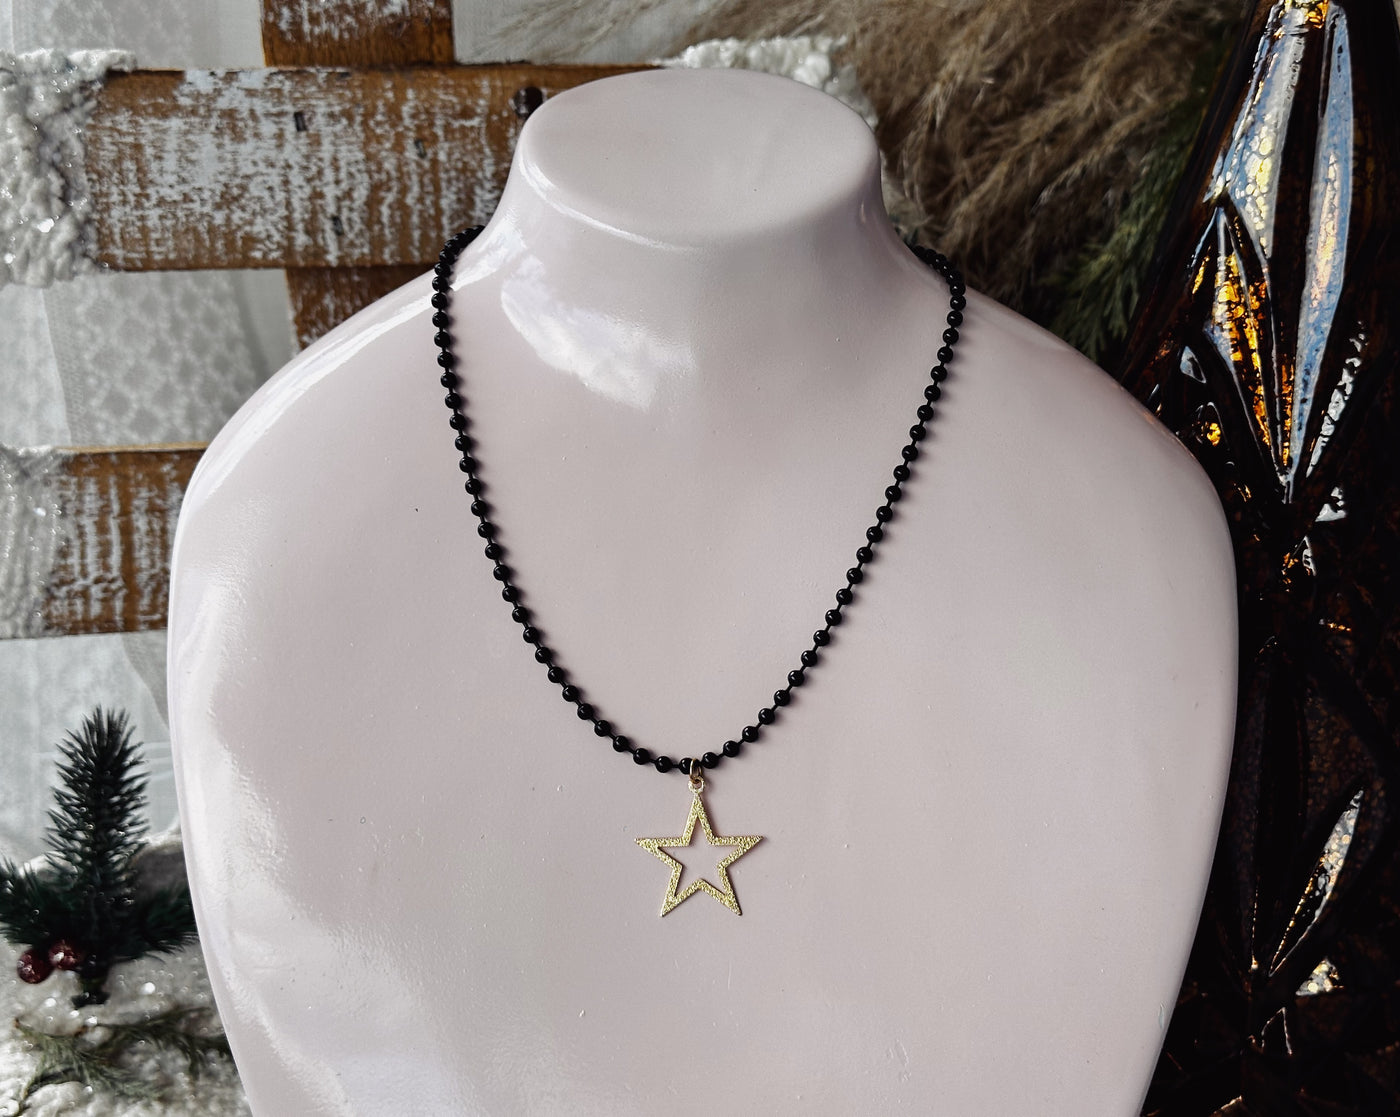 Black ball chain and star